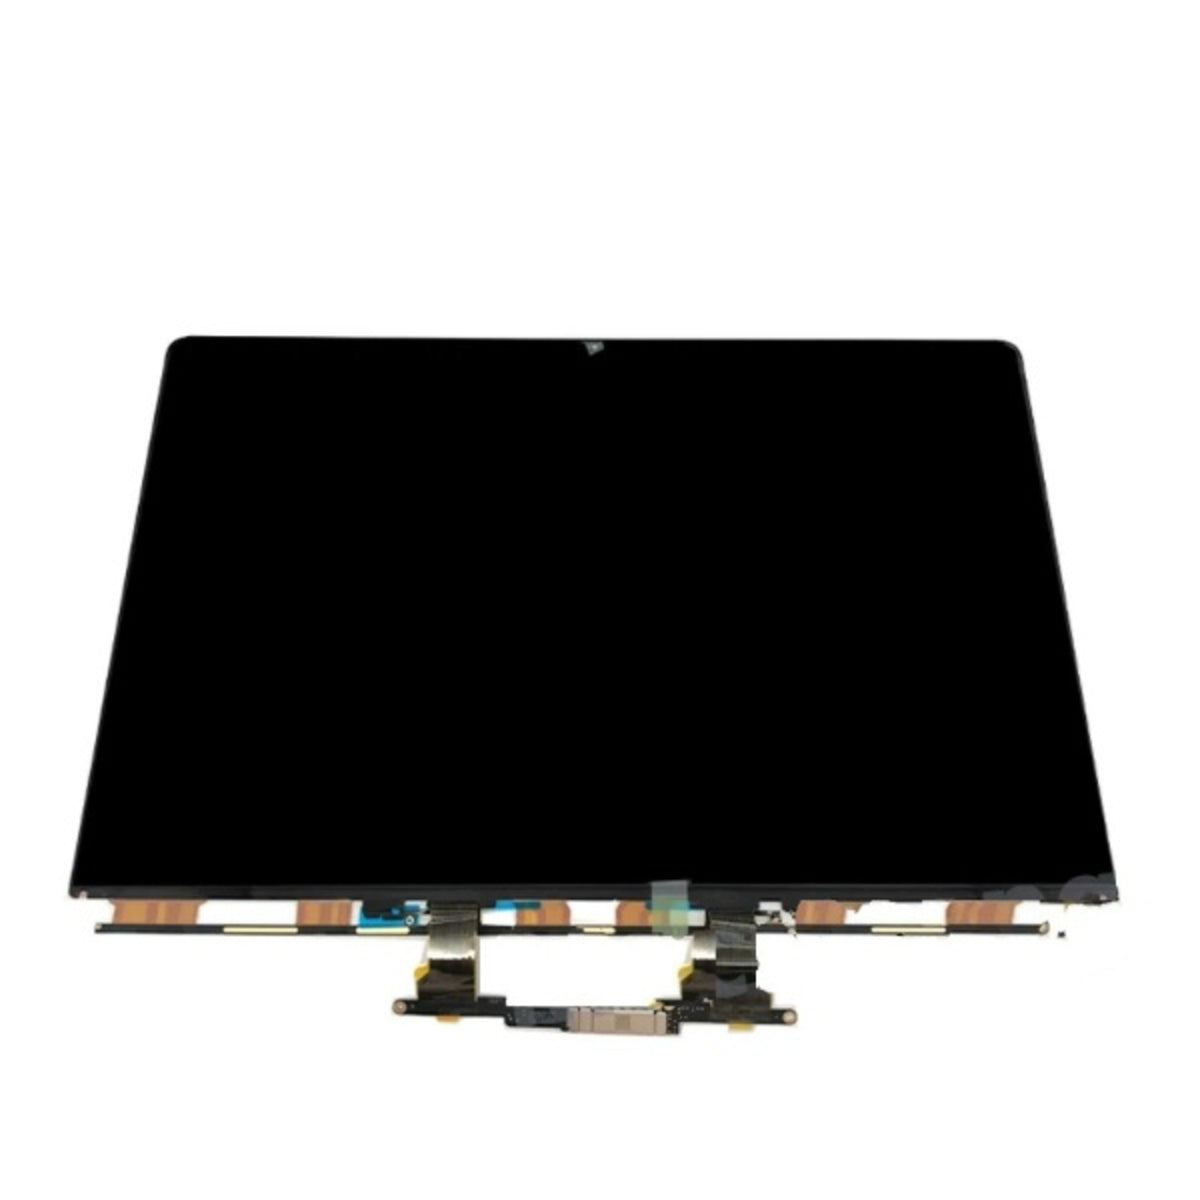 New & Genuine LCD Screen A2141 For Apple MacBook Pro Retina 16" MID 2019 661-05095, 661-06375 LCD Only